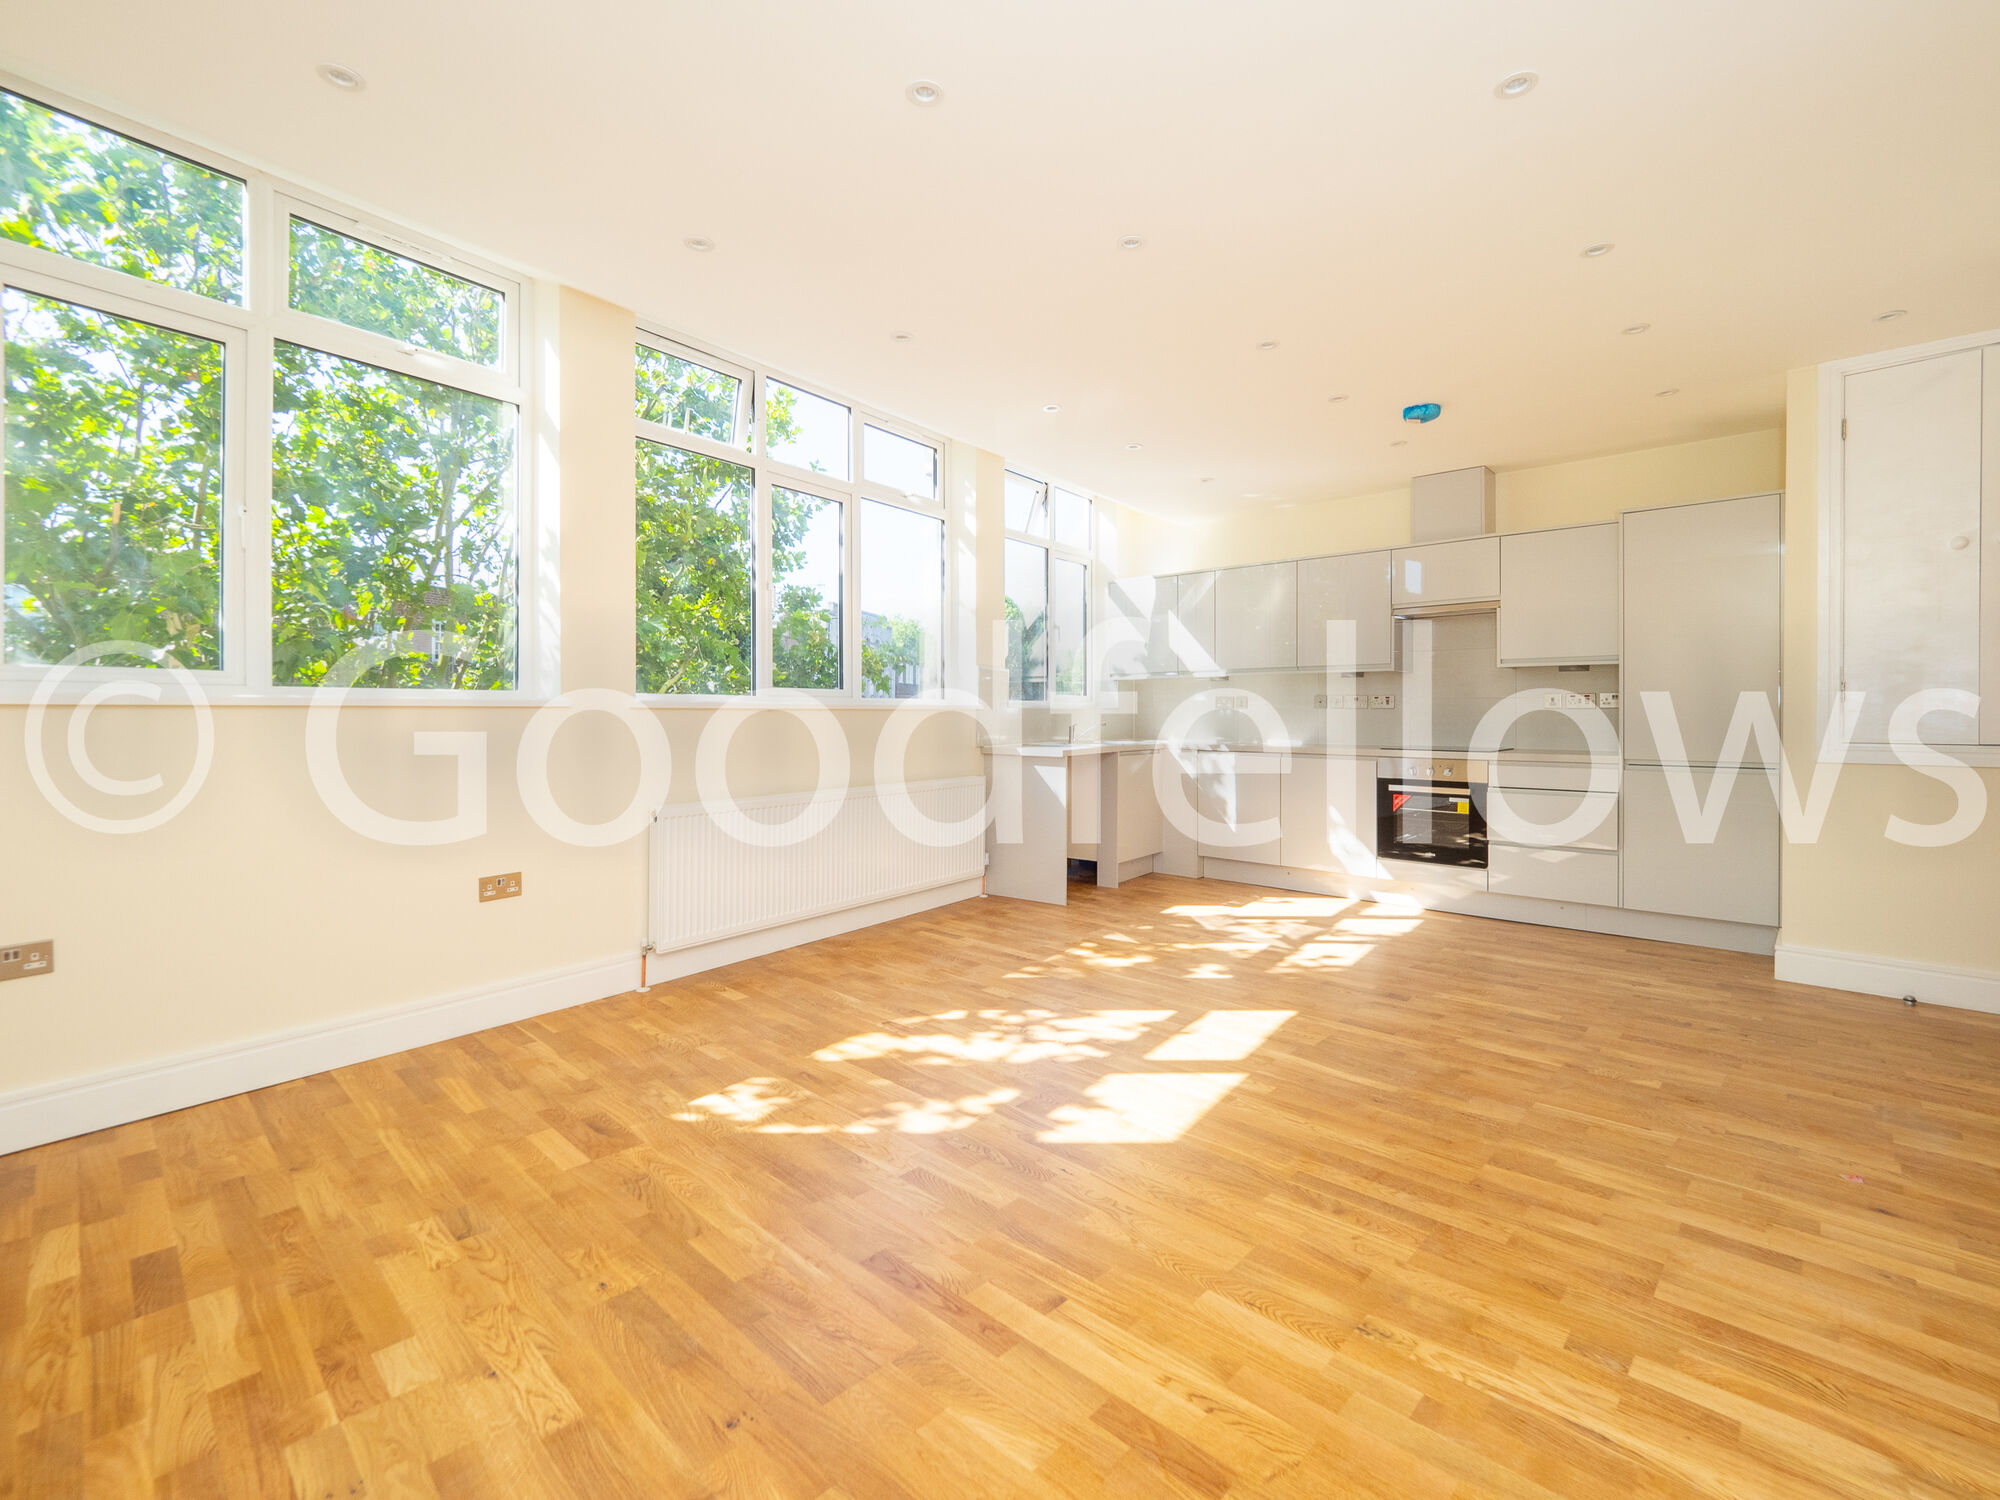 2 bedroom  maisonette to rent, Available now London Road, Morden, SM4, main image